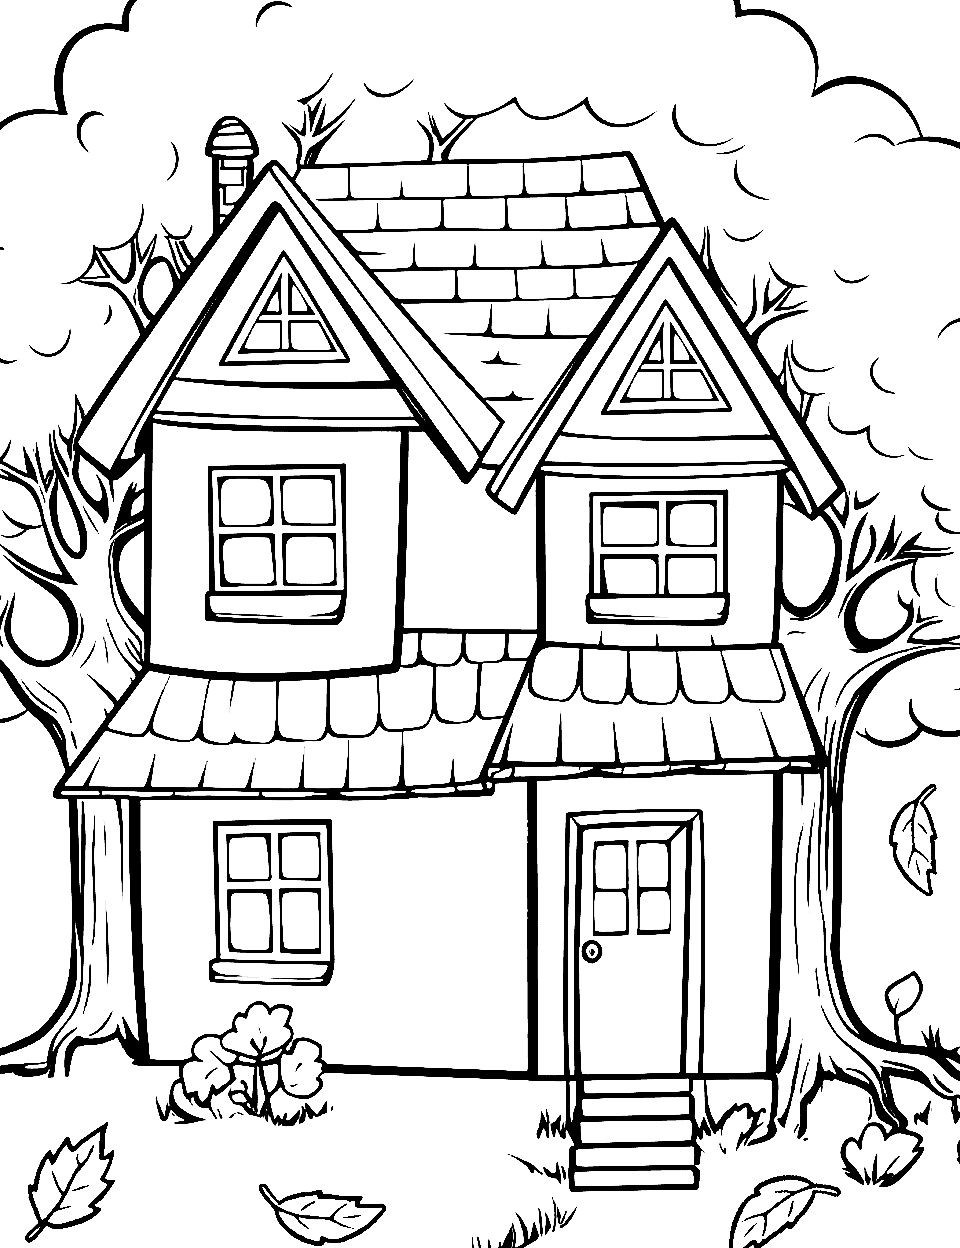 Autumnal Harvest Home Coloring Page - A house surrounded by trees shedding autumn leaves.